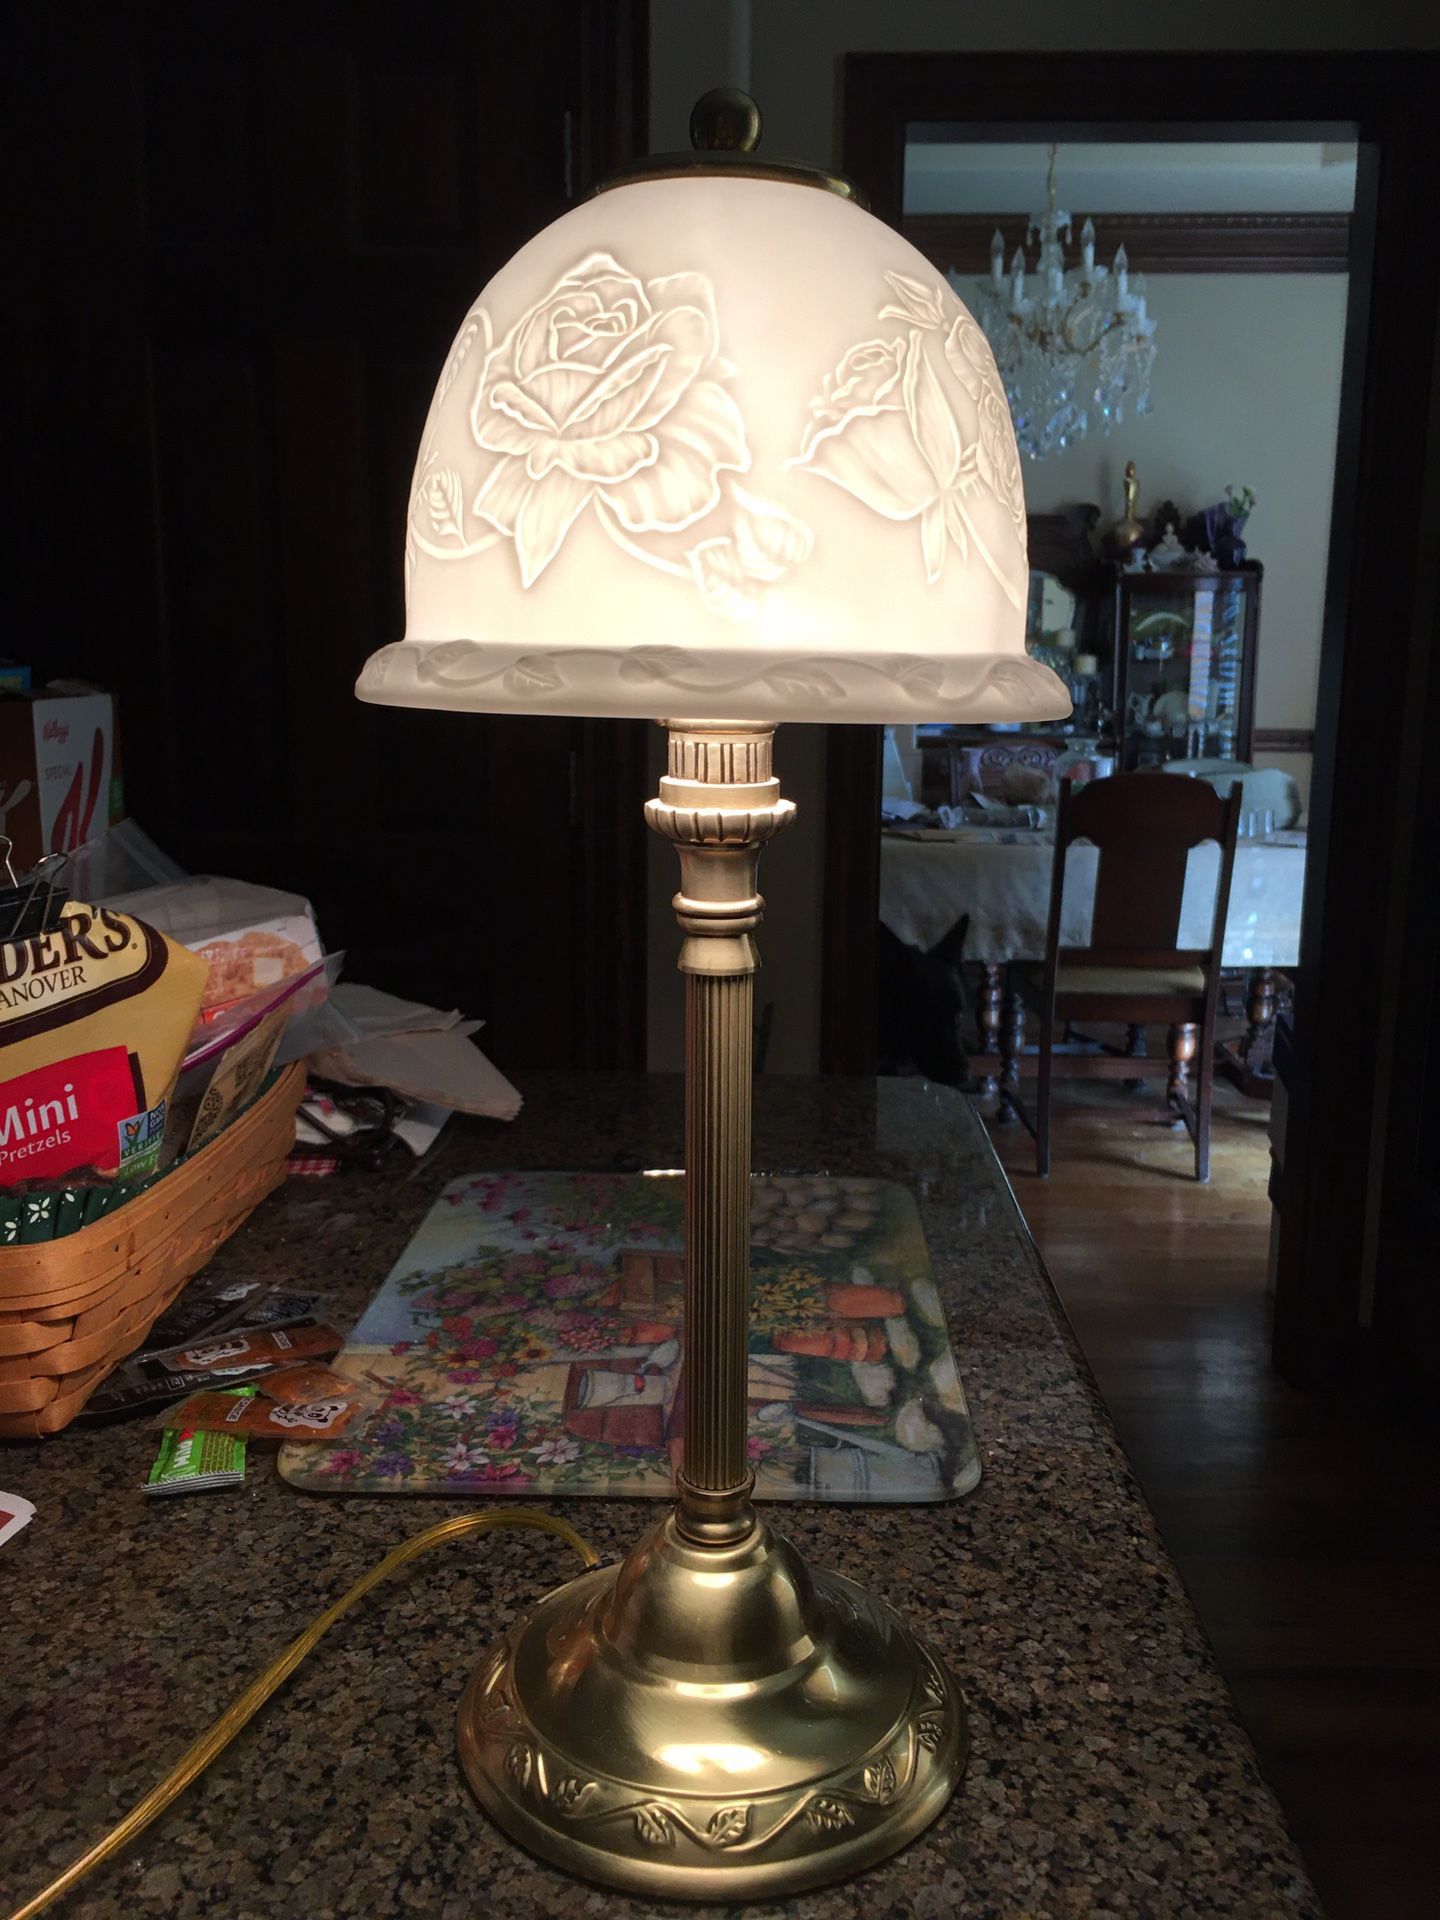 Hampton Bay lamp. Shows rose Flower Design Through The Lamp When It Is On